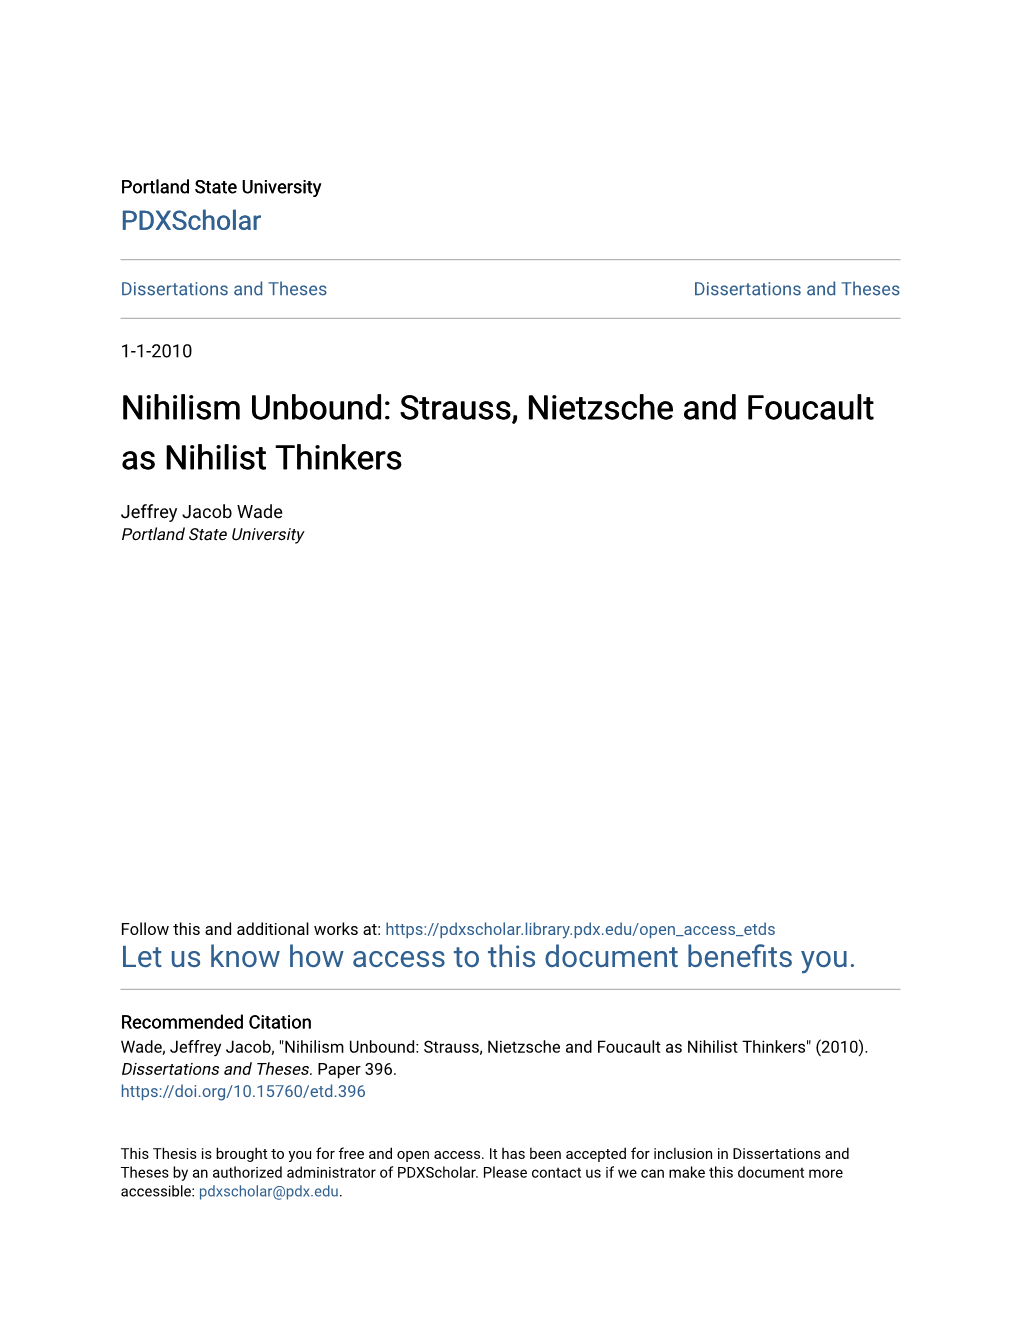 Strauss, Nietzsche and Foucault As Nihilist Thinkers